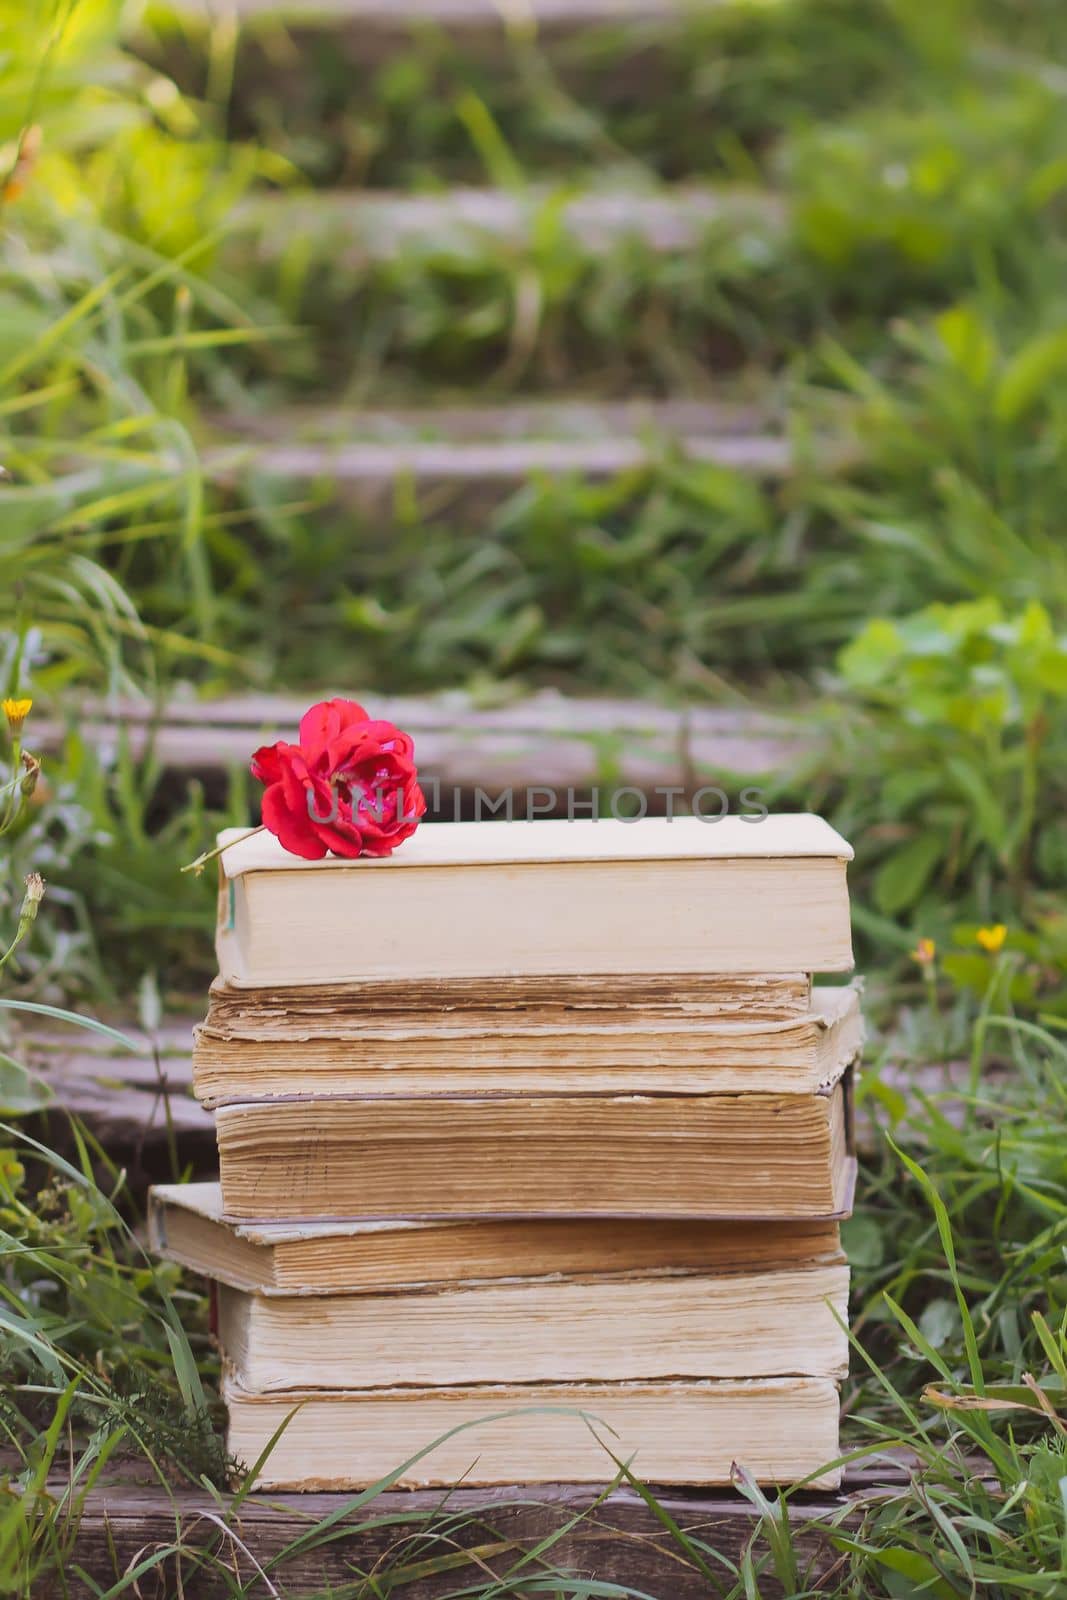 Vintage card with stack of old books and red rose flower outdoors